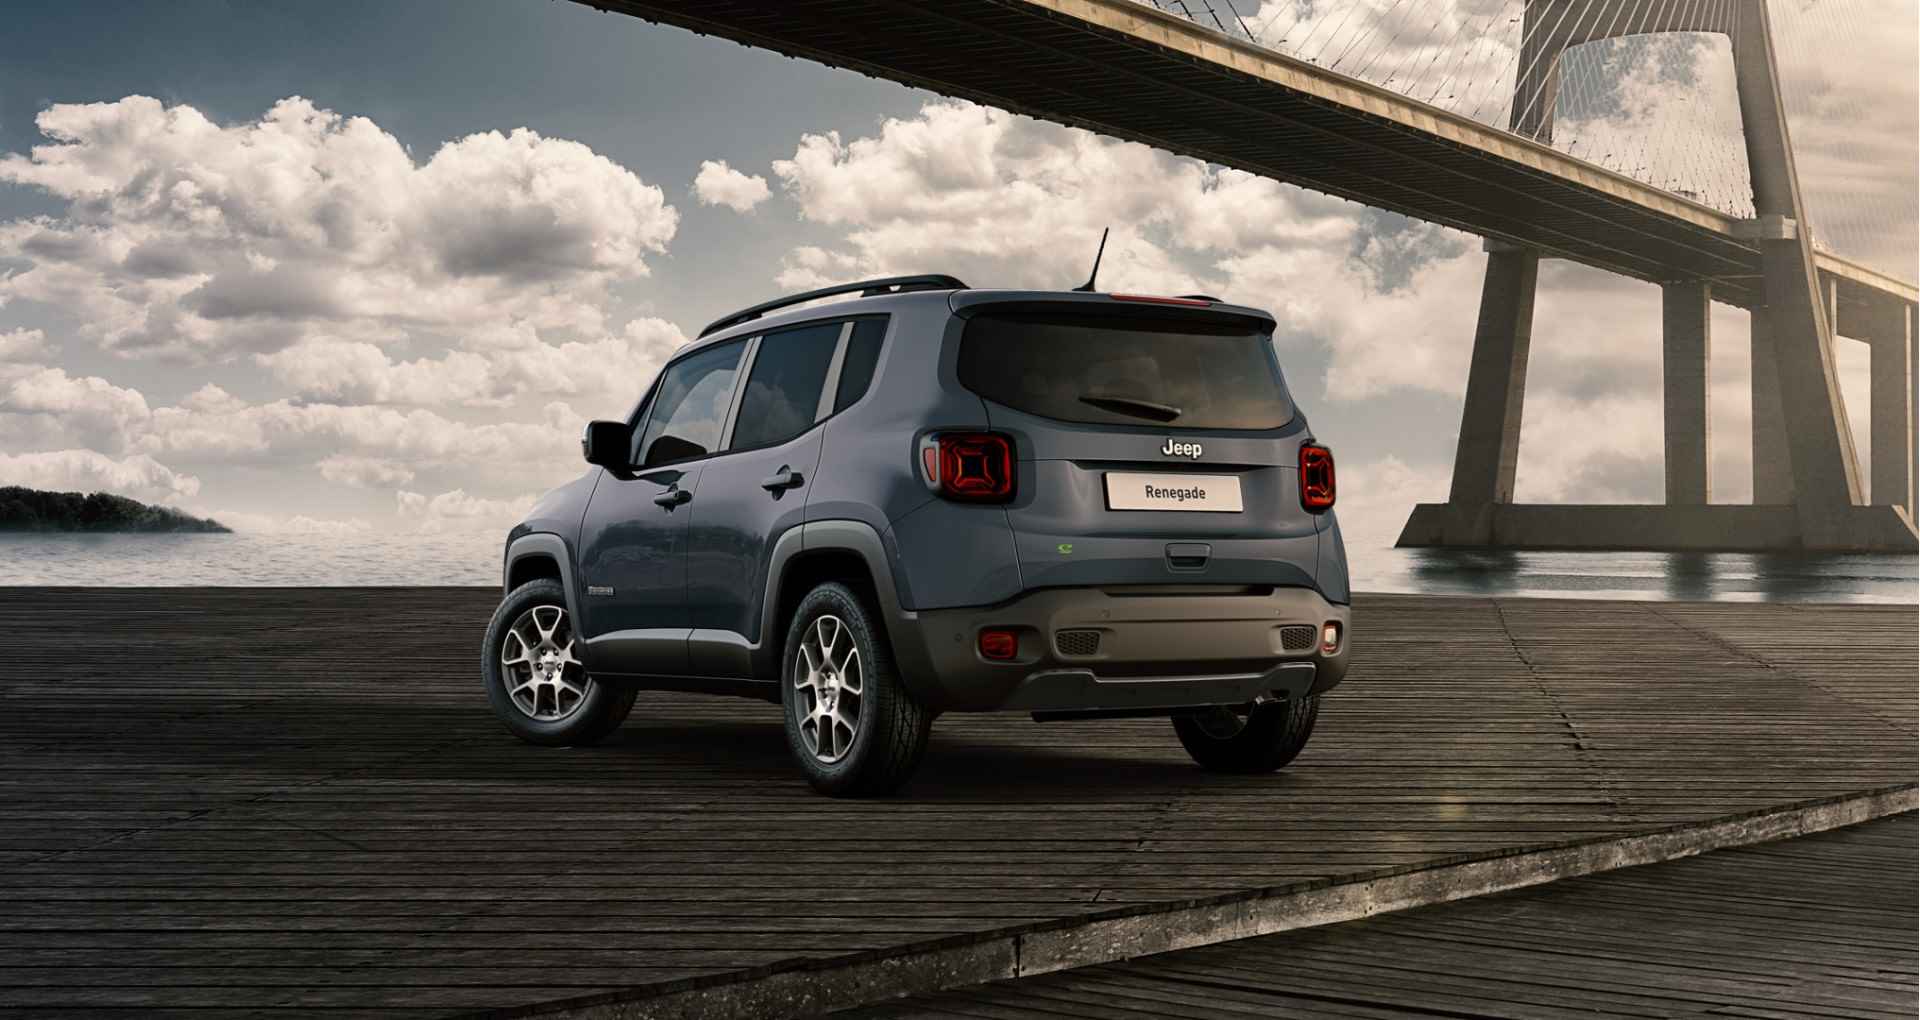 Jeep Renegade 1.5T 130 pk Automaat e-Hybrid Limited | Registratiekorting  €5.143 | Convenience Pack | Style Pack |  Visibility Pack | Uconnect™ LIVE-infotainmentsysteem met 8,4-inch Touchscreen, Navigatie en Bluetooth - 3/9